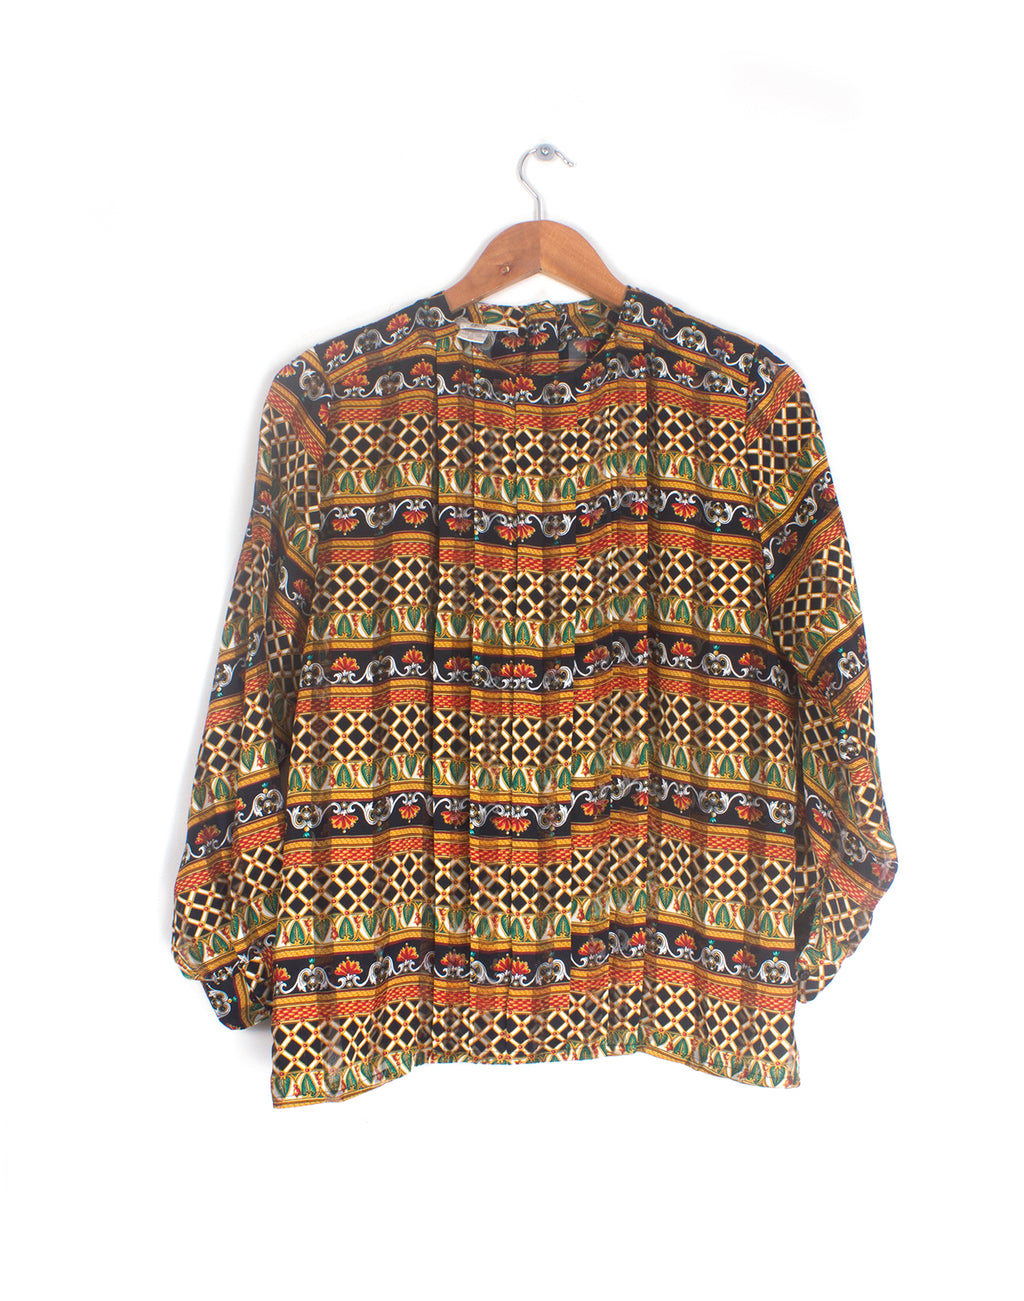 Vintage 80's Graphic Long Sleeve Blouse - Size XS S